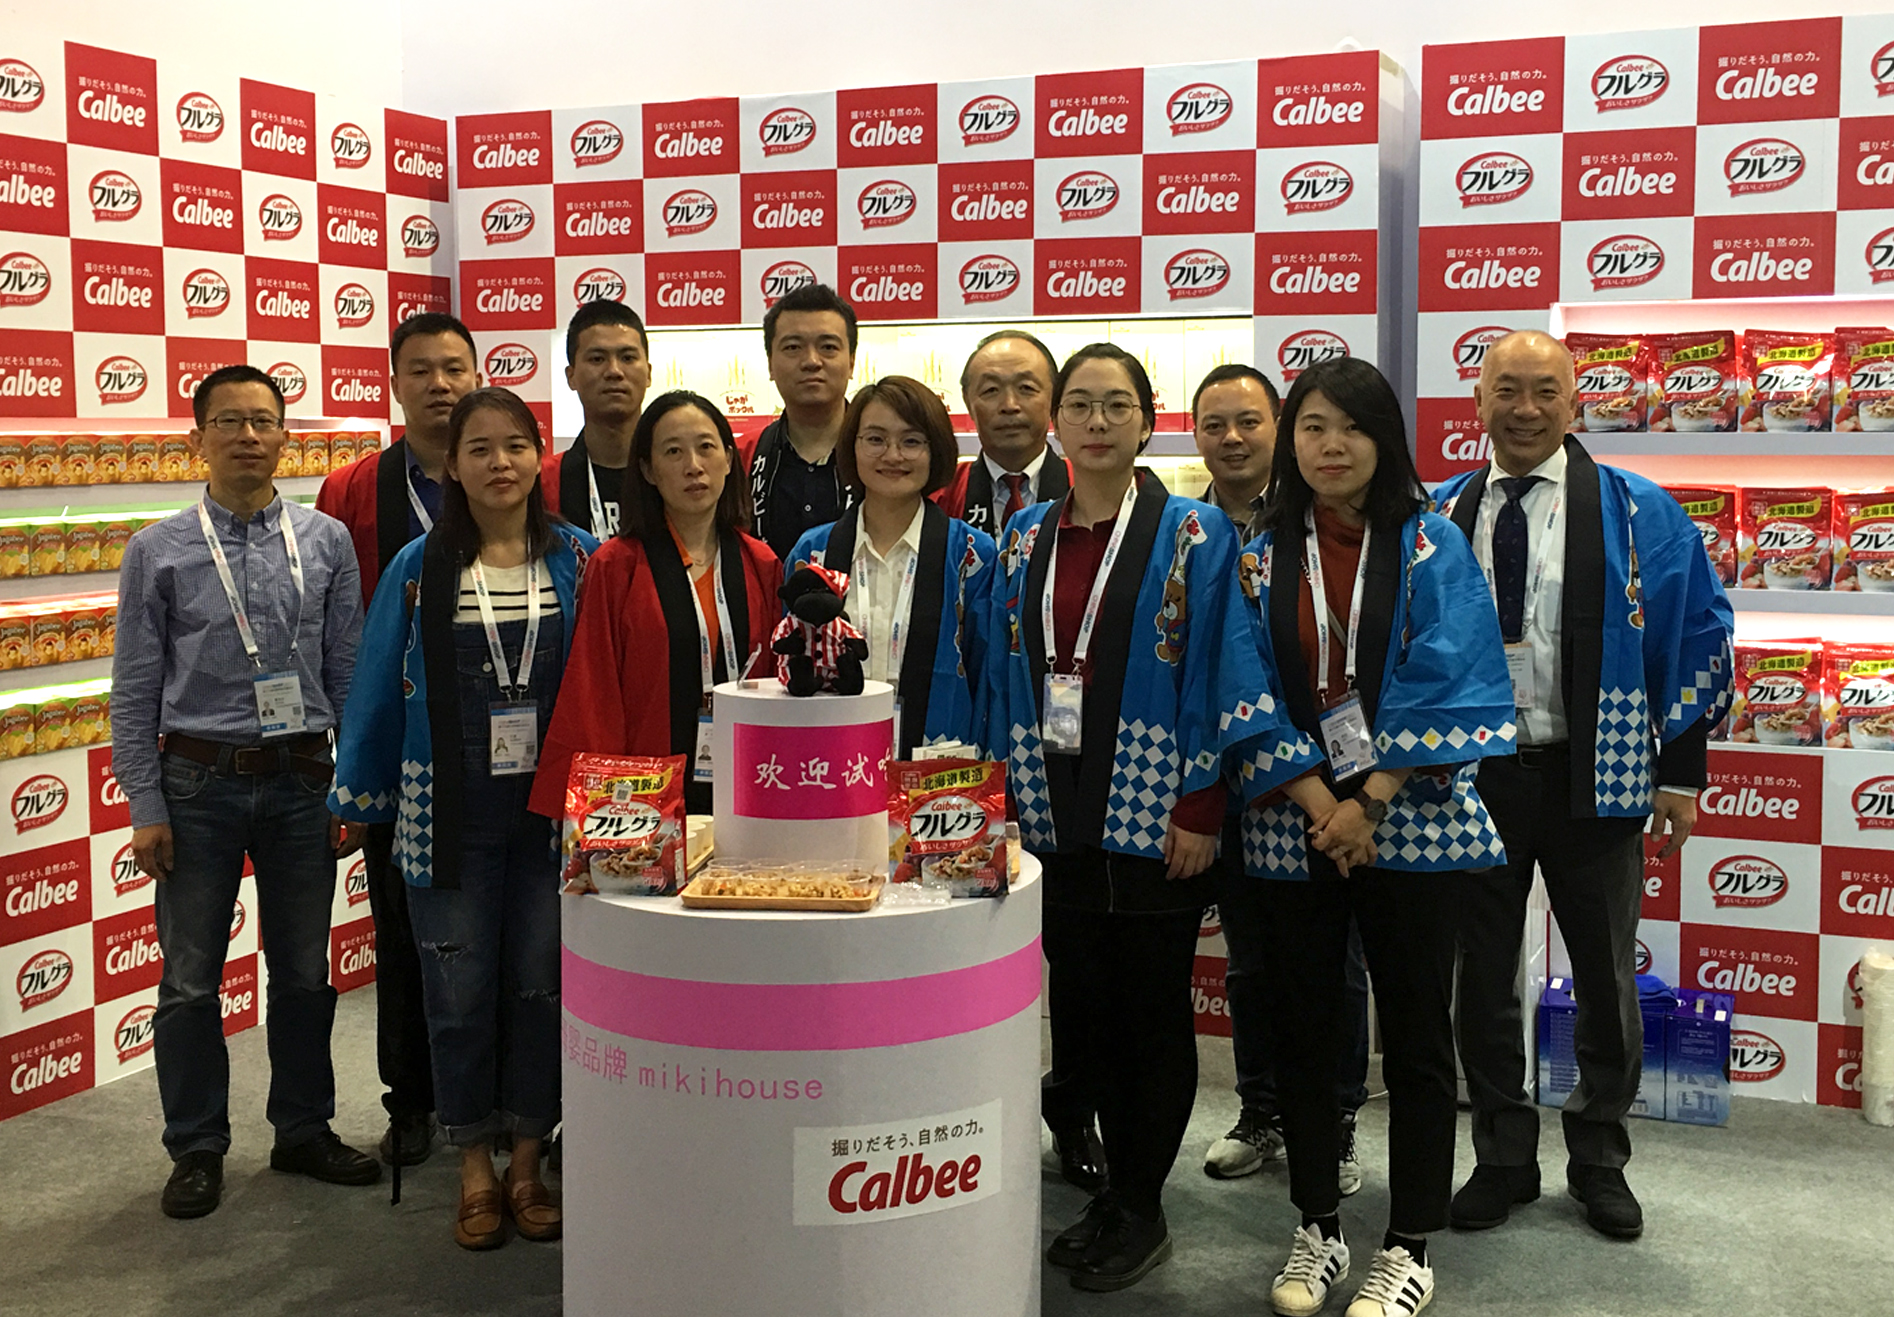 Ningshing Ubay participated in the 19th SIAL China Food Exhibition